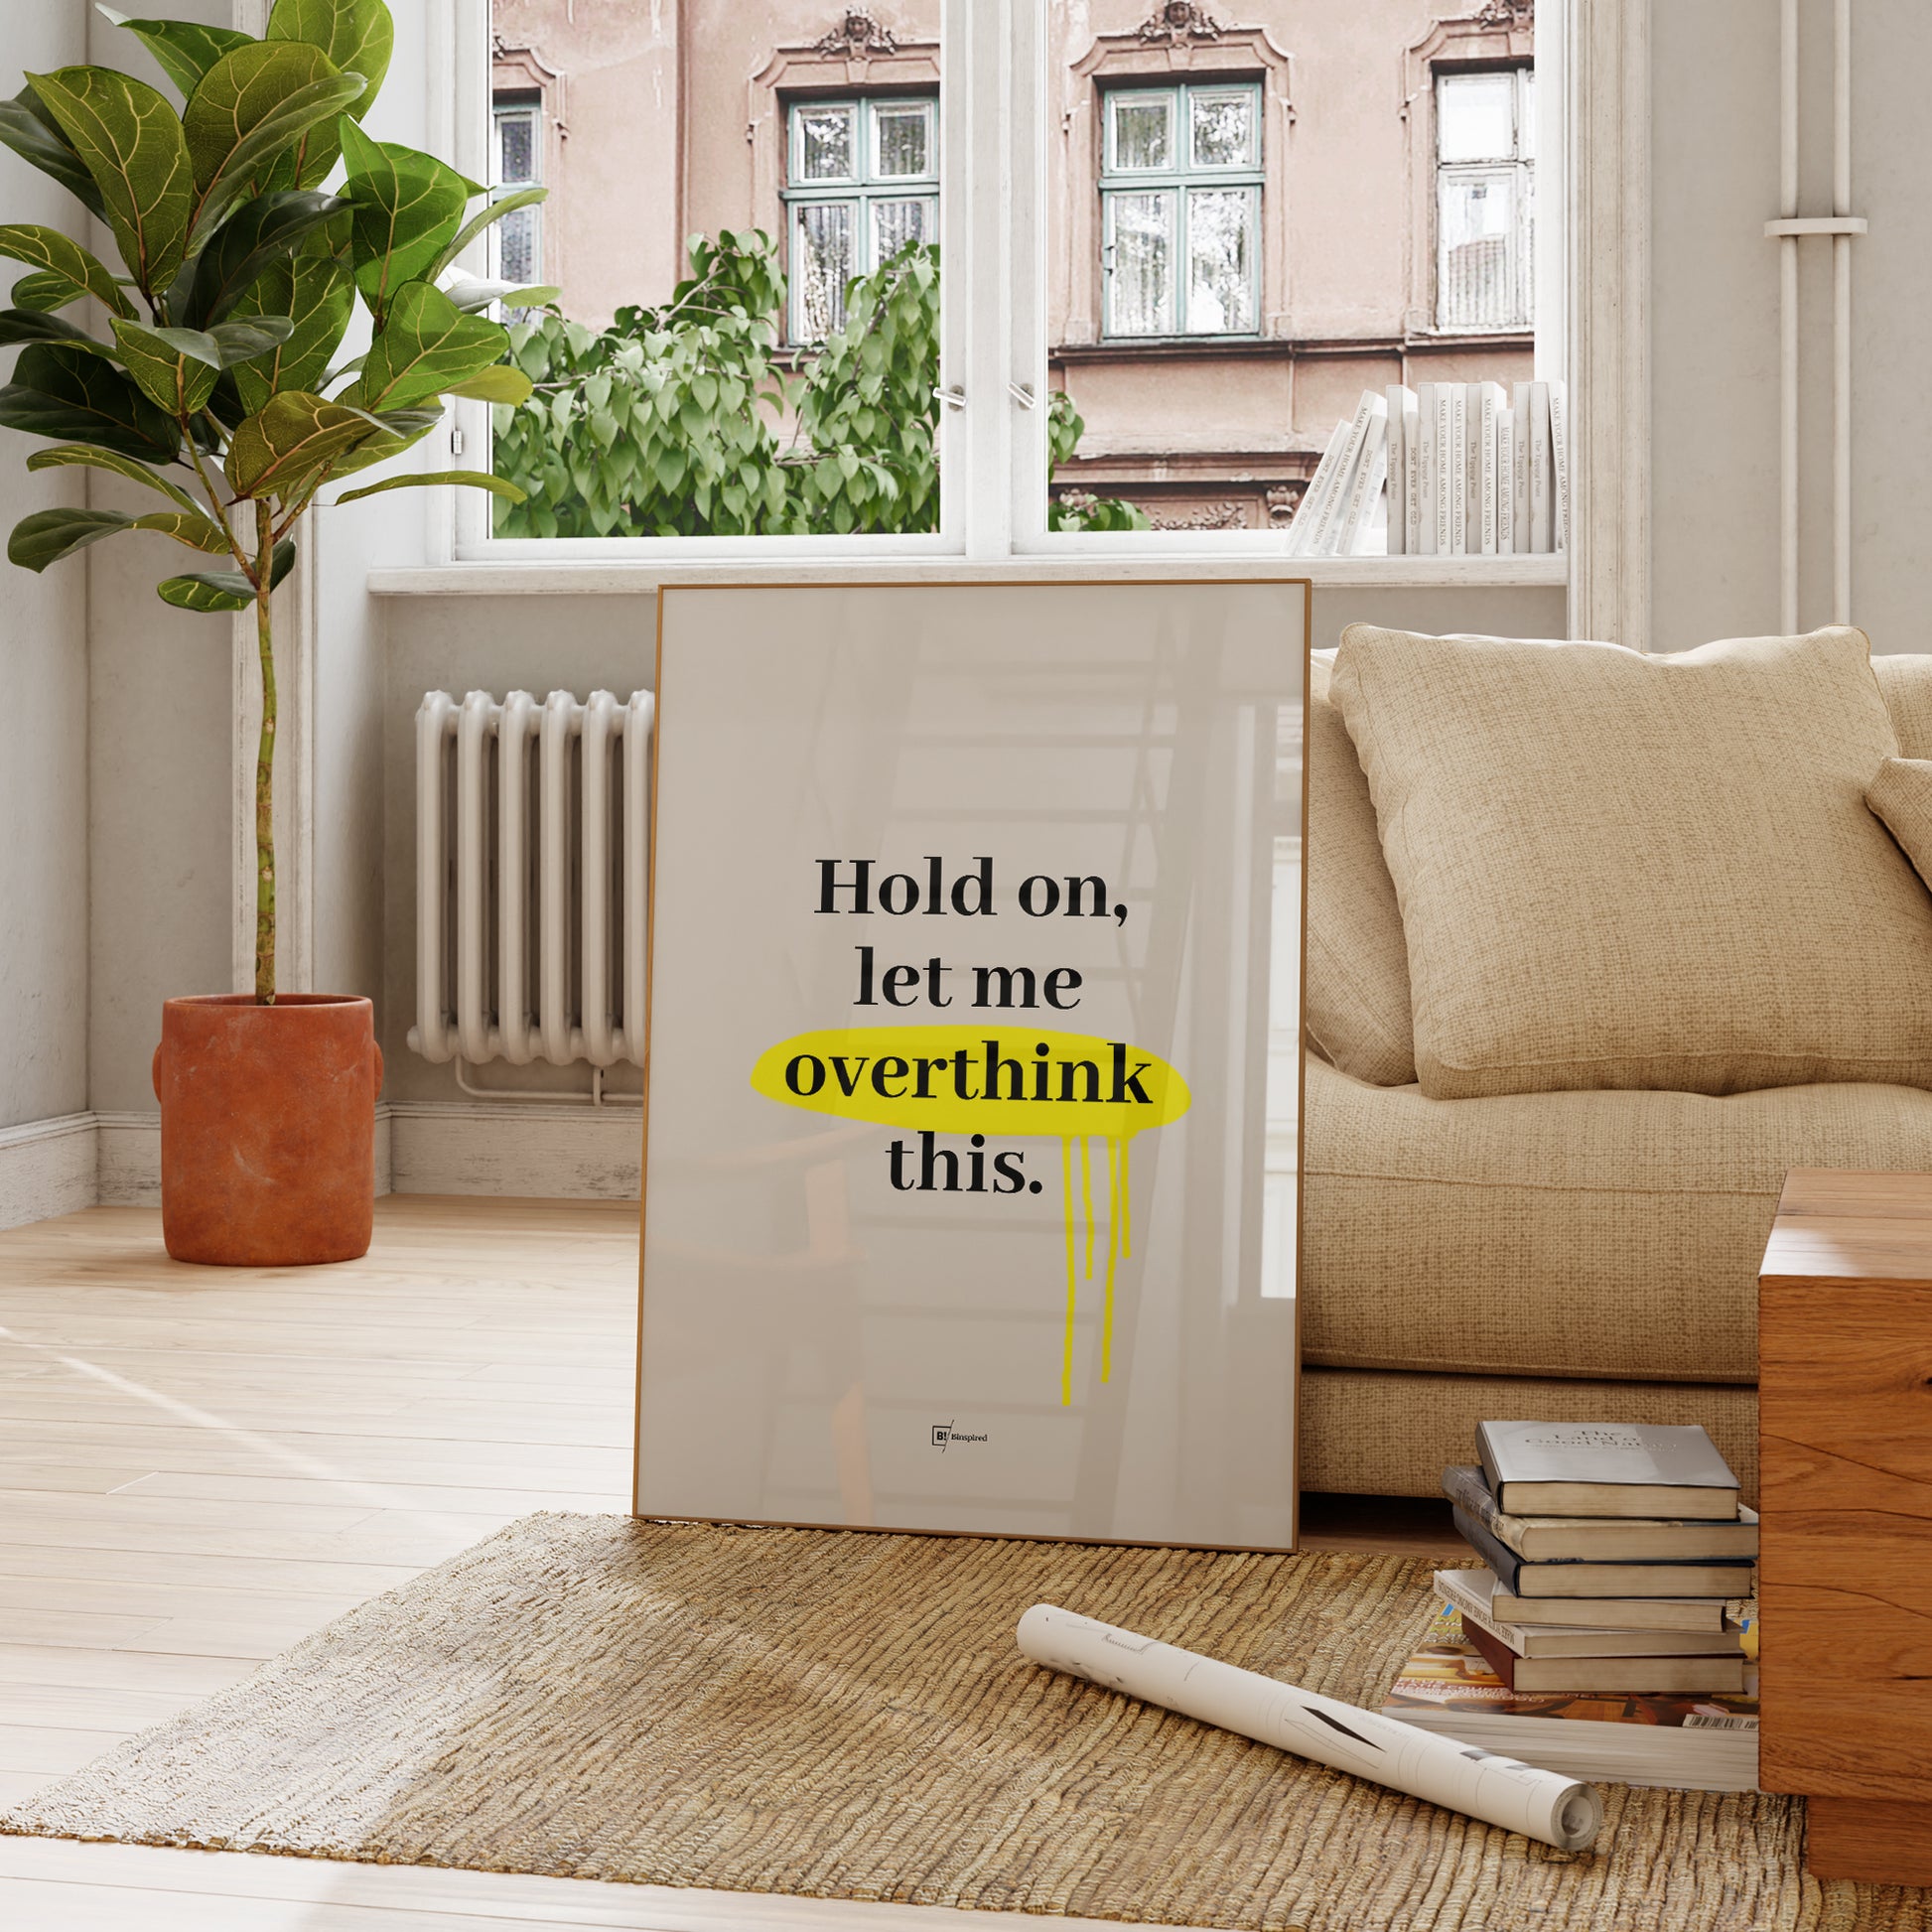 Be inspired by our "Hold on, let me overthink this" quote art print! This artwork was printed using the giclée process on archival acid-free paper and is presented in a french living room that captures its timeless beauty in every detail.